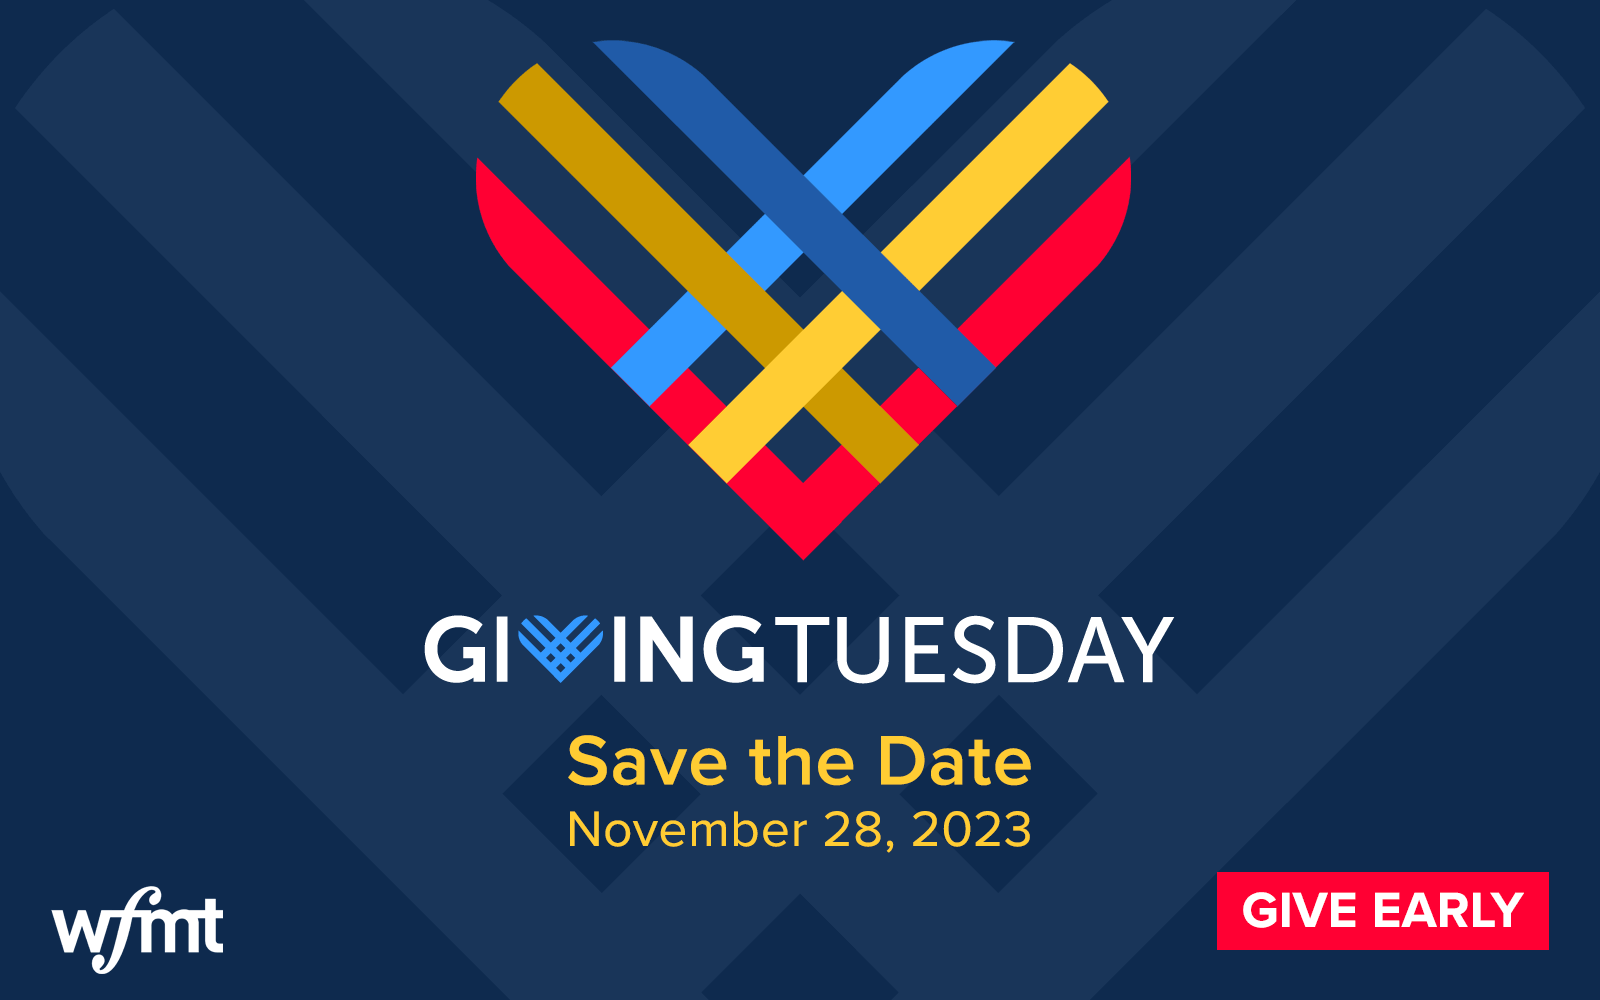 Save the date, donate to WFMT on Giving Tuesday!